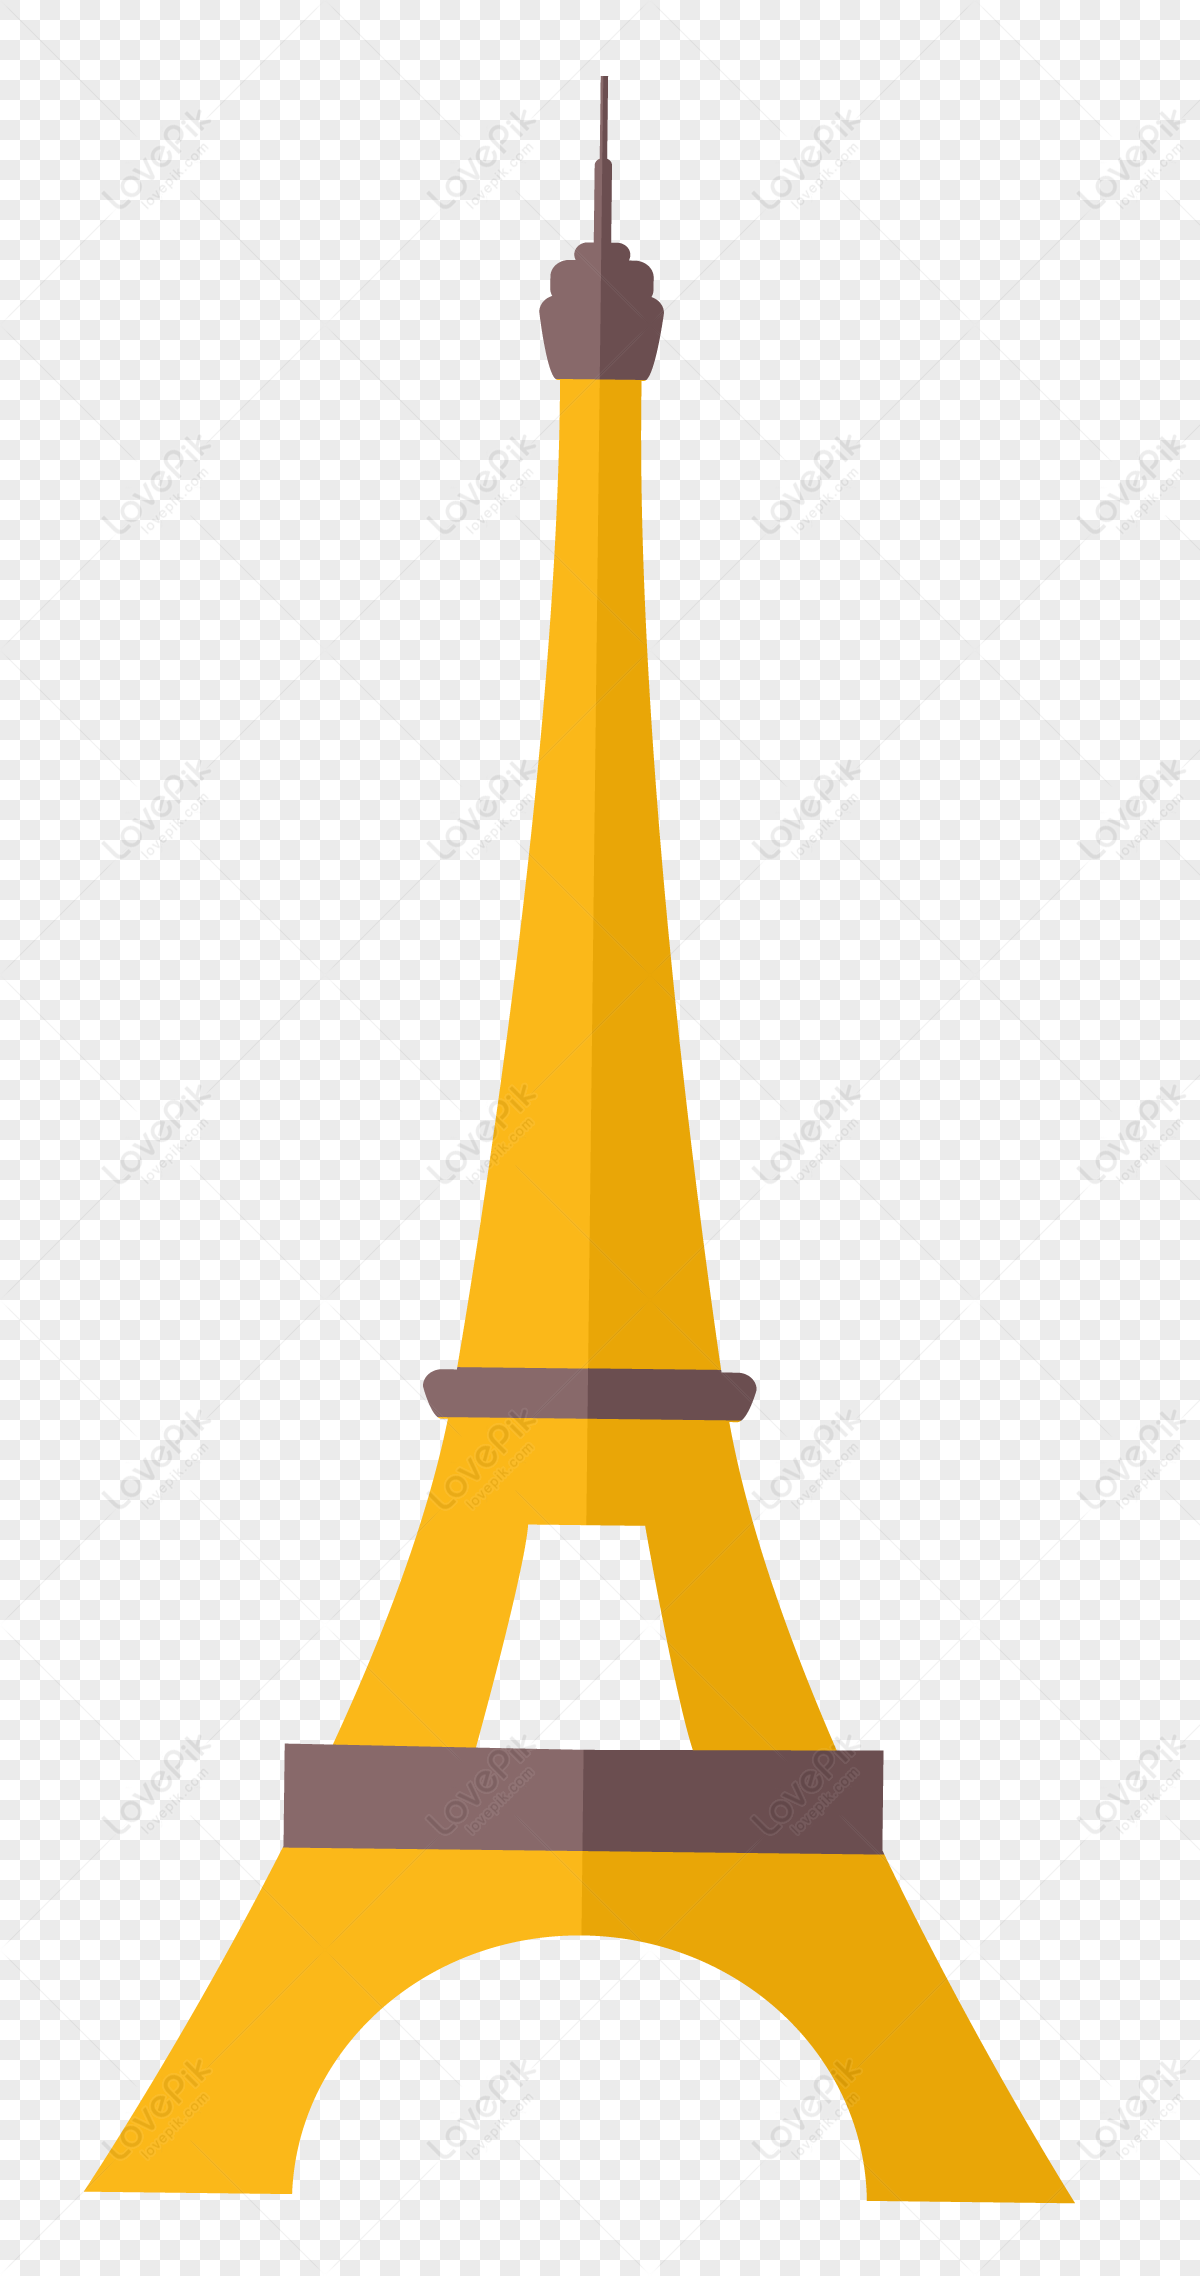 Eiffel Tower, material, hand painting, eiffel tower png hd transparent image